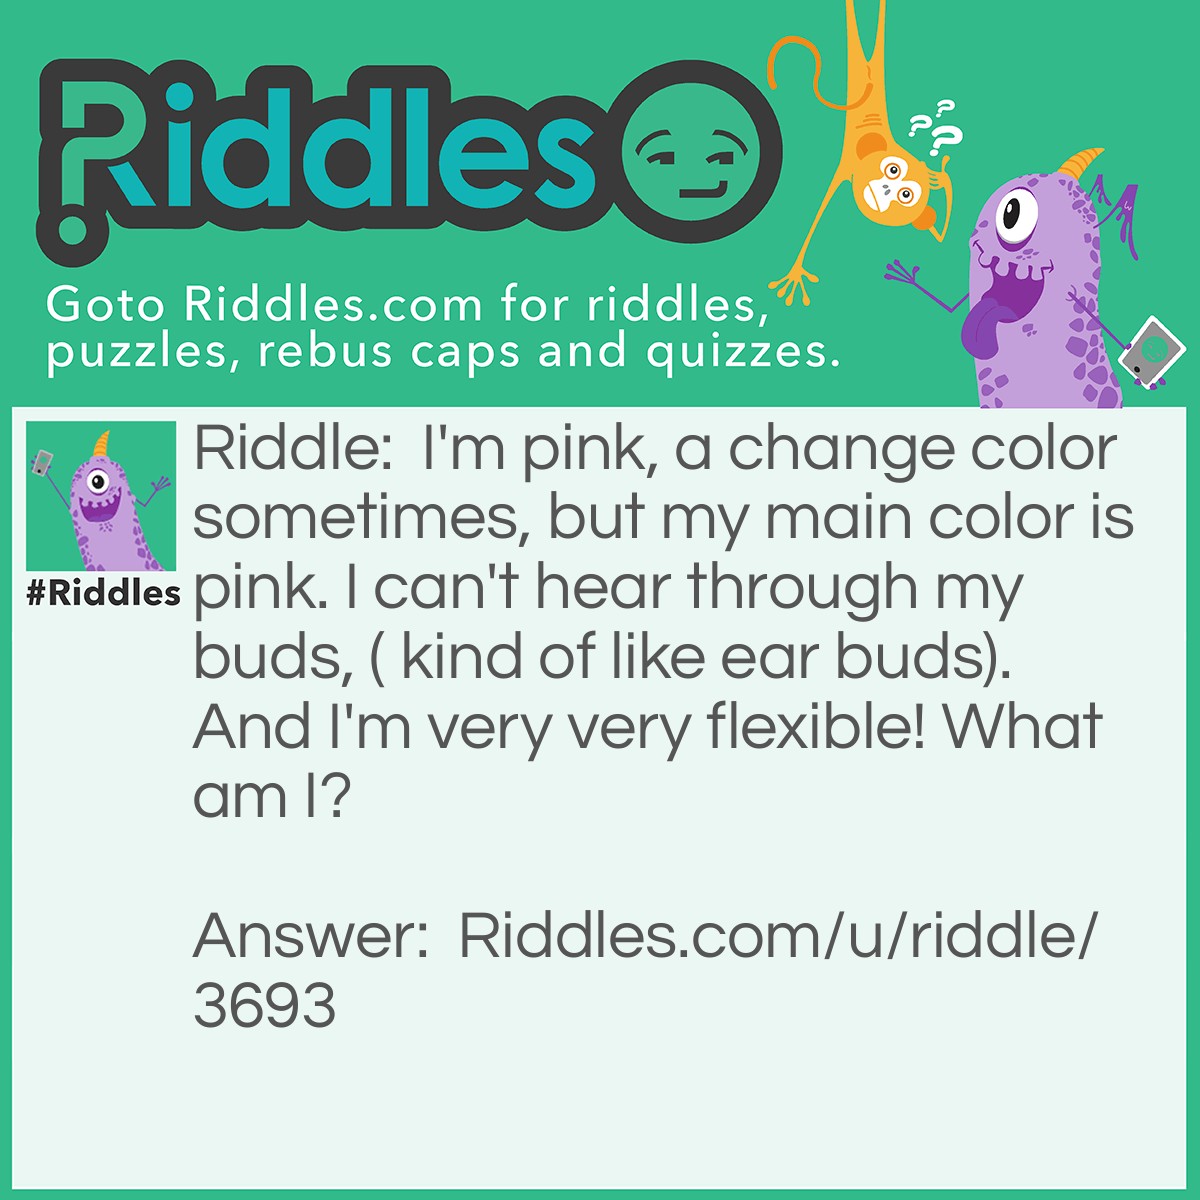 Riddle: I'm pink, a change color sometimes, but my main color is pink. I can't hear through my buds, ( kind of like ear buds). And I'm very very flexible! What am I? Answer: A tongue! If I eat a Popsicle it will change color, I have TASTE buds, And it's the most flexible thing in your body